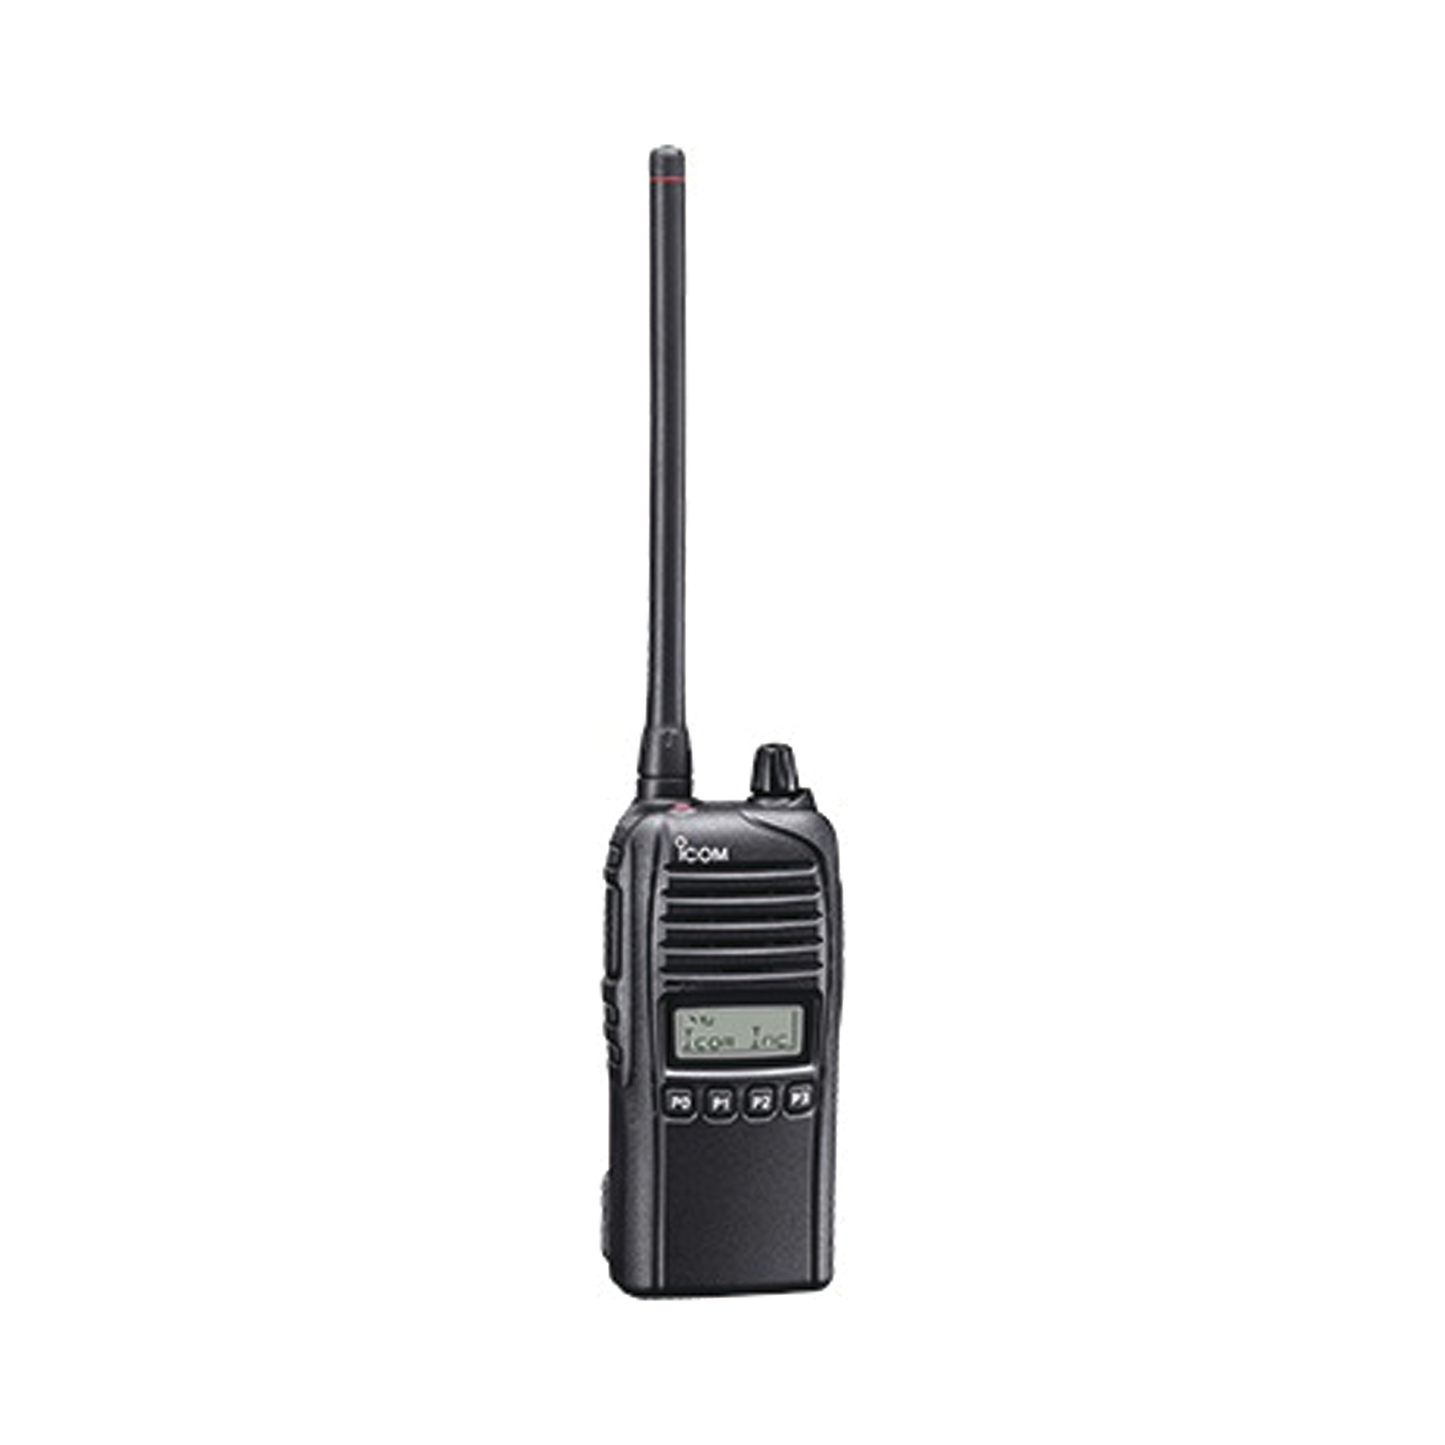 Portable Digital Radio NXDN, 5W, 136-174MHz, 128 Channels, Submersible IP67. Analog, Digital & Conventional, Trunking and Multi Trunking.  Supplied with Battery, Belt Clip, Charger, and Antenna.